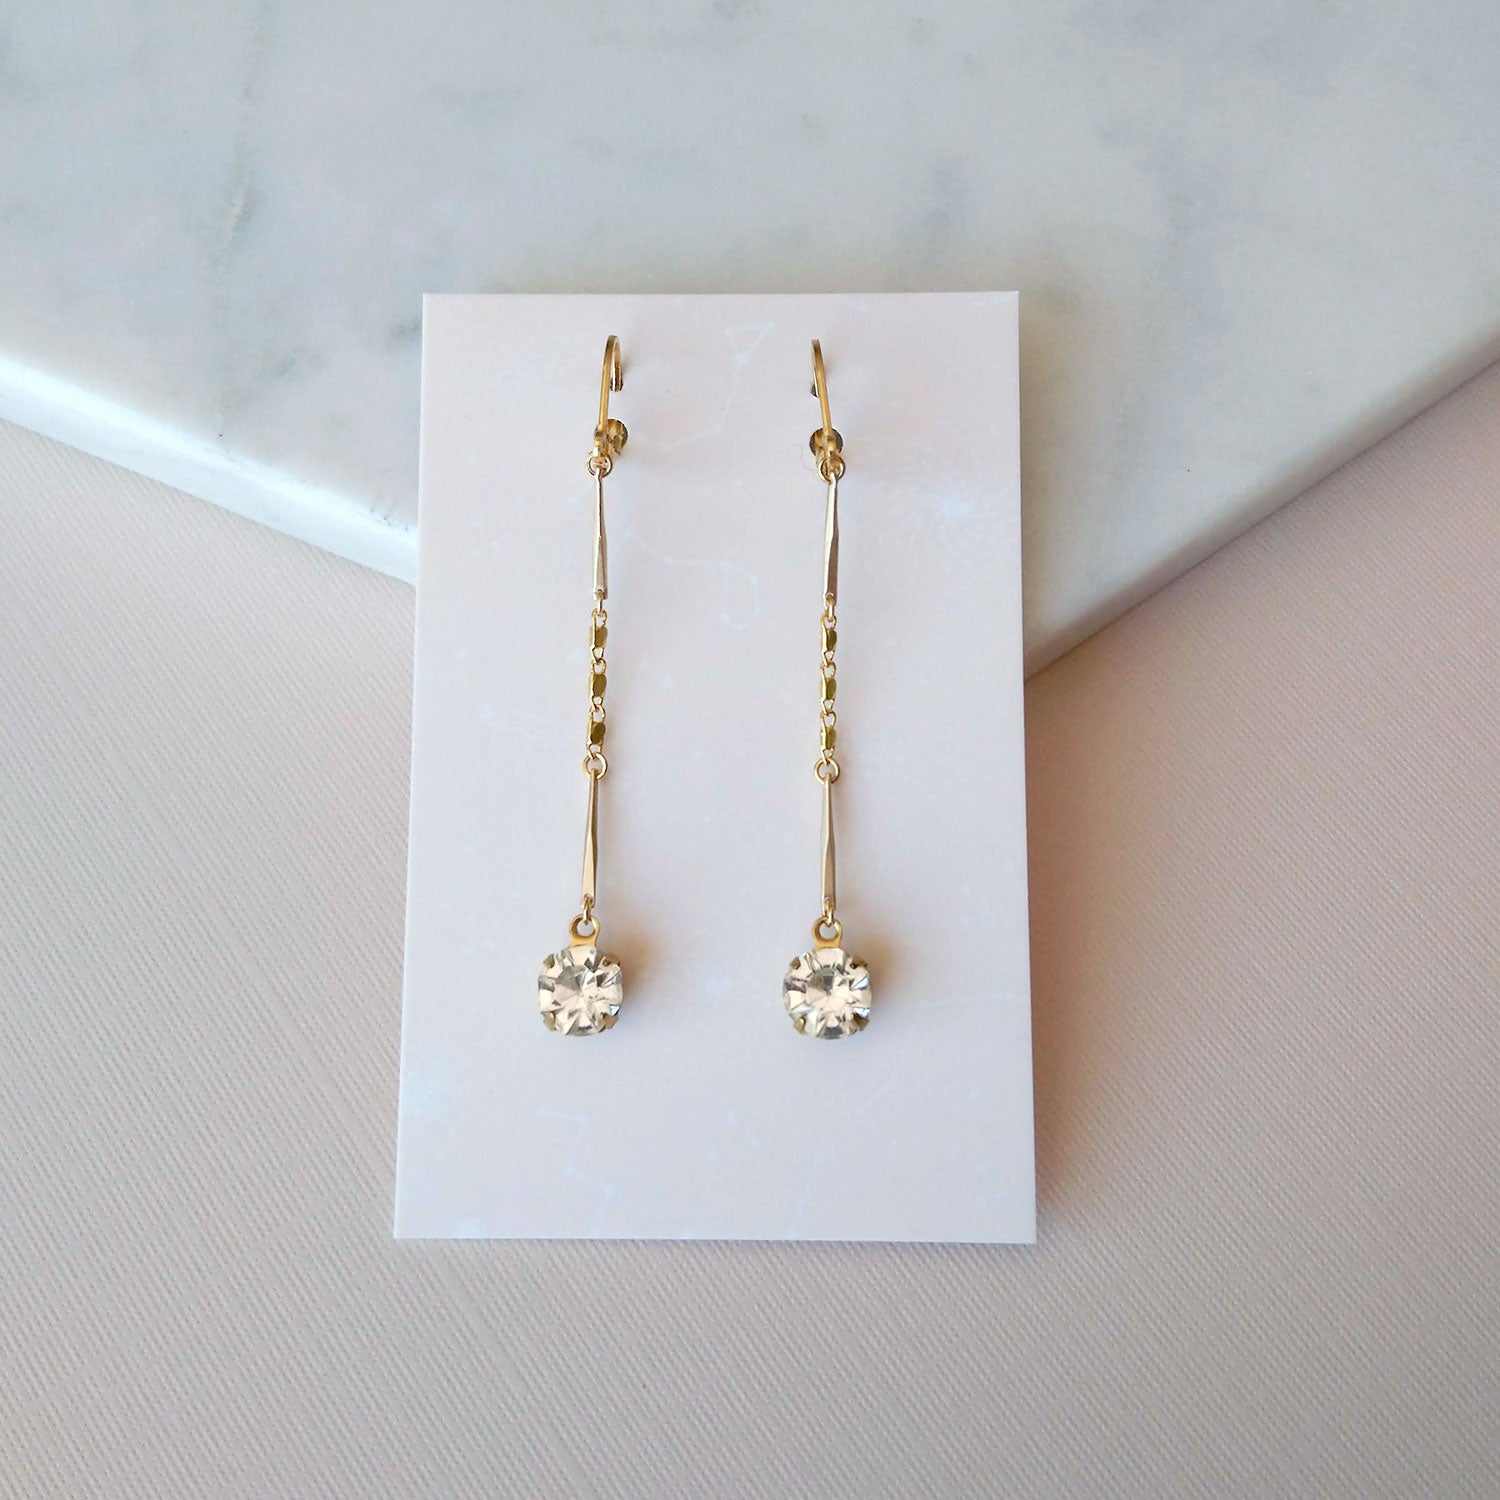 crystal and gold earrings for prom or bridesmaids